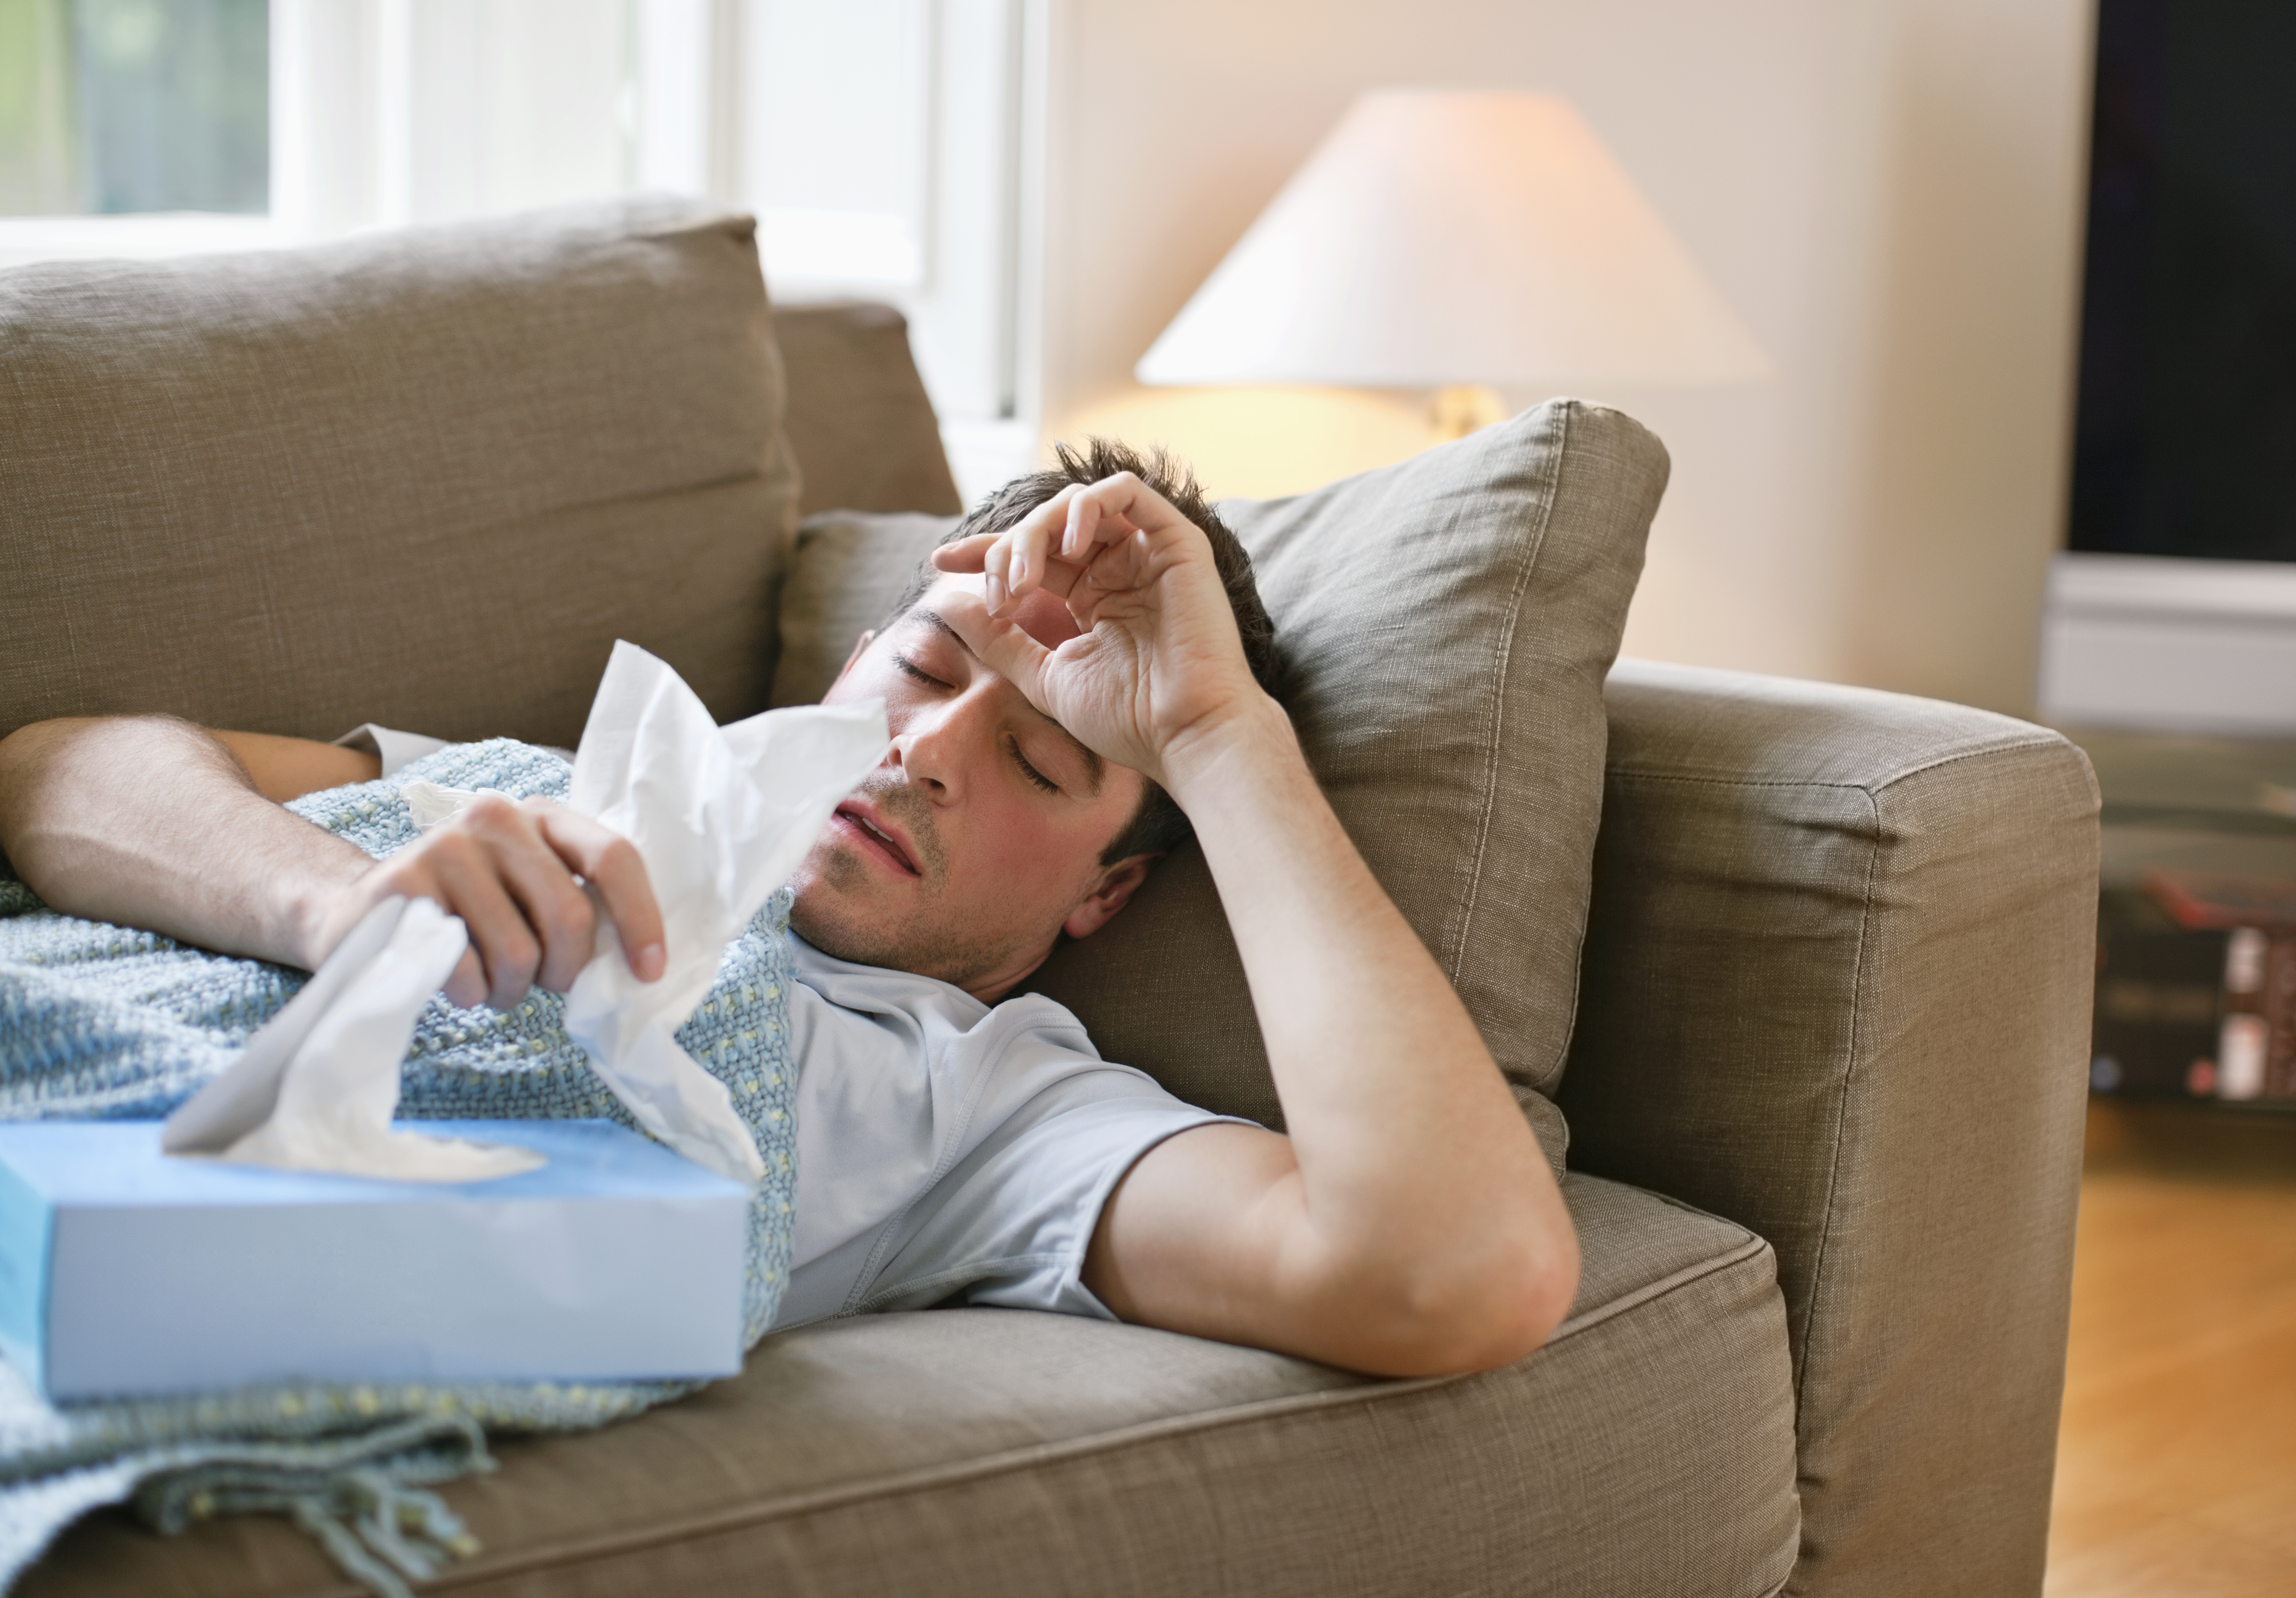 Women everywhere are hilariously sharing their frustration with man flu